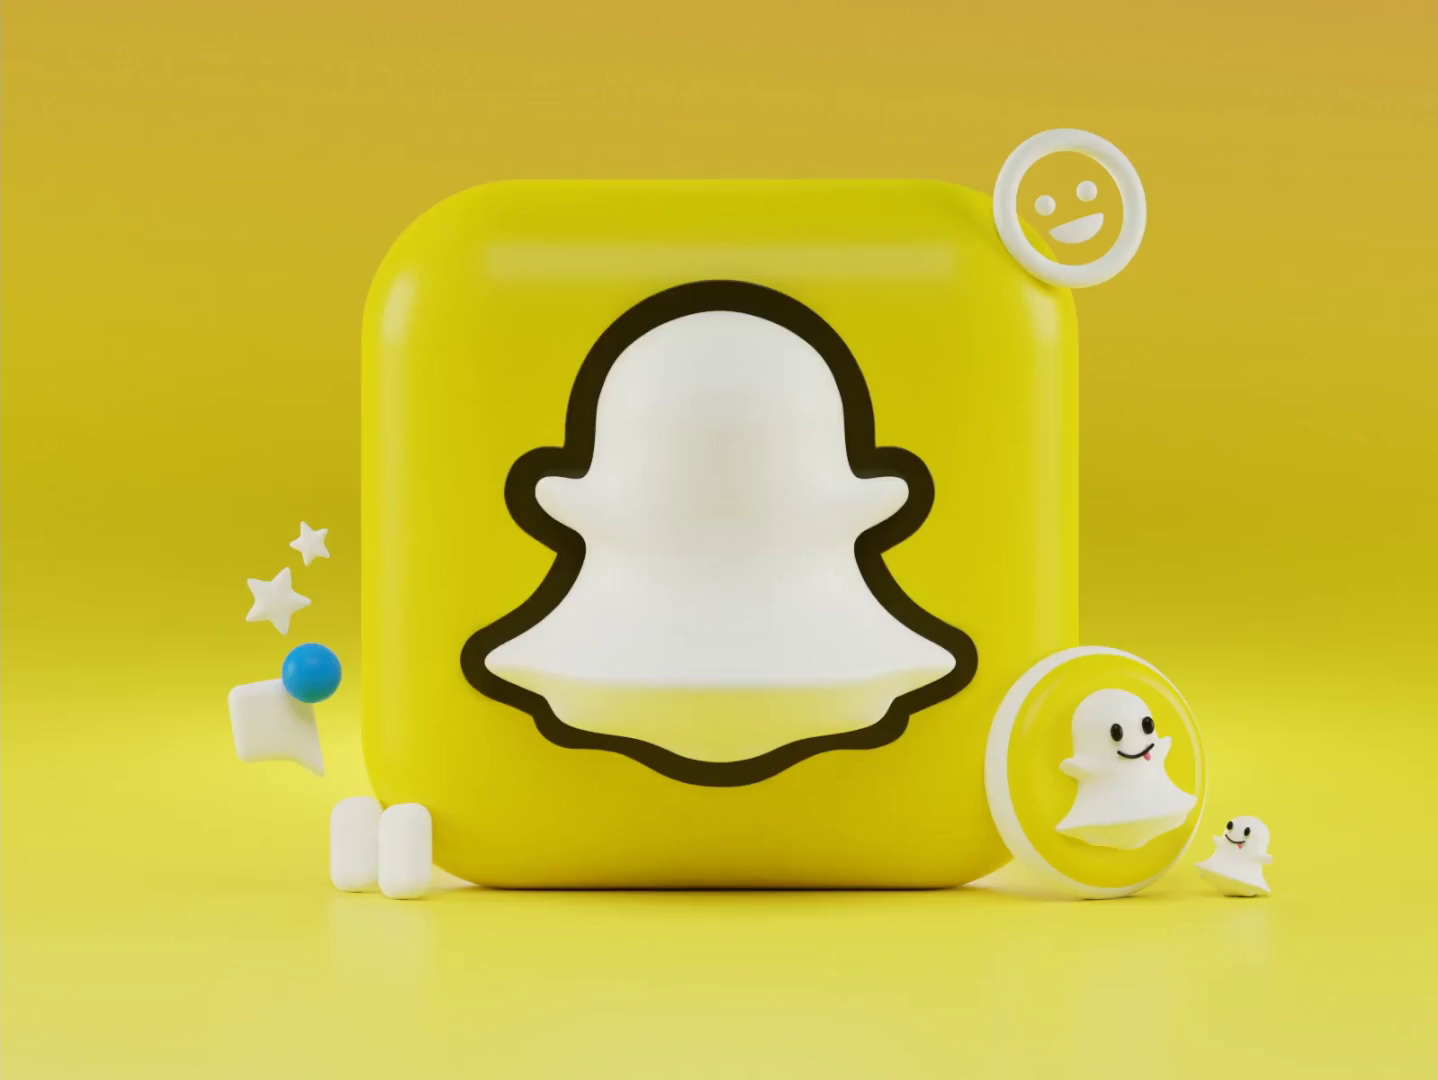 Snapchat 3d Icons Concept by Alexander Shatov on Dribbble